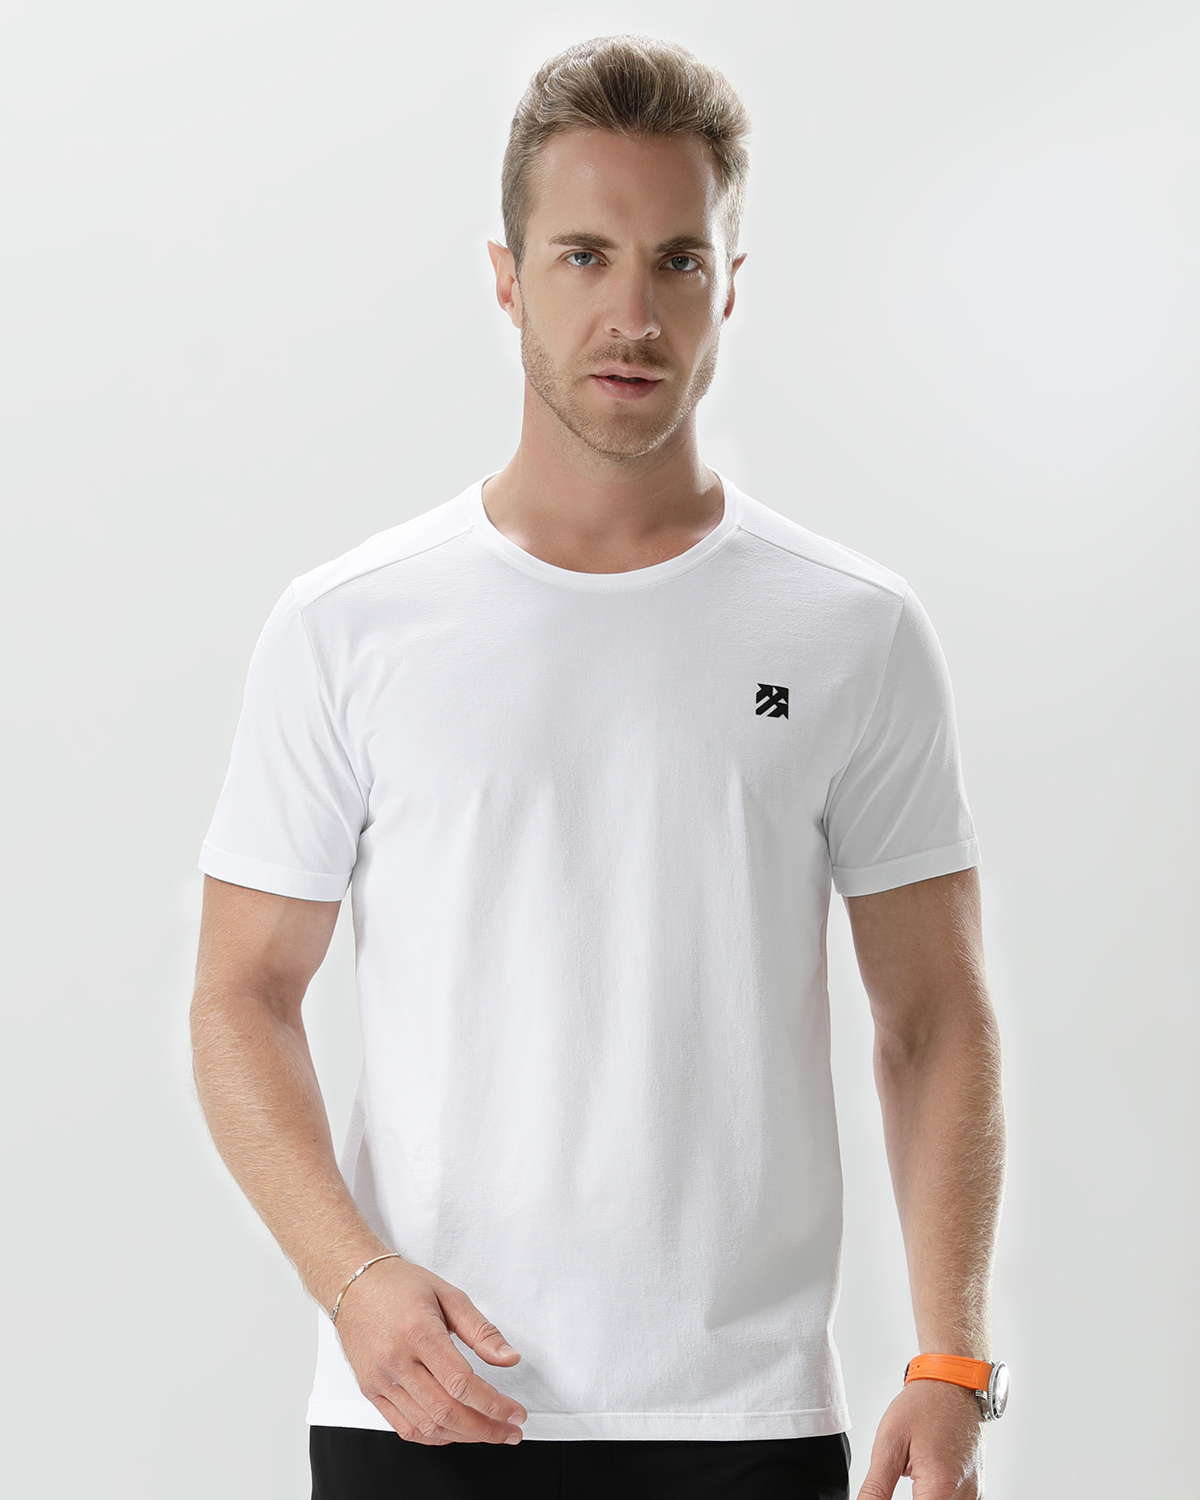  Men's Sports Quick Dry Work Out T-Shirt